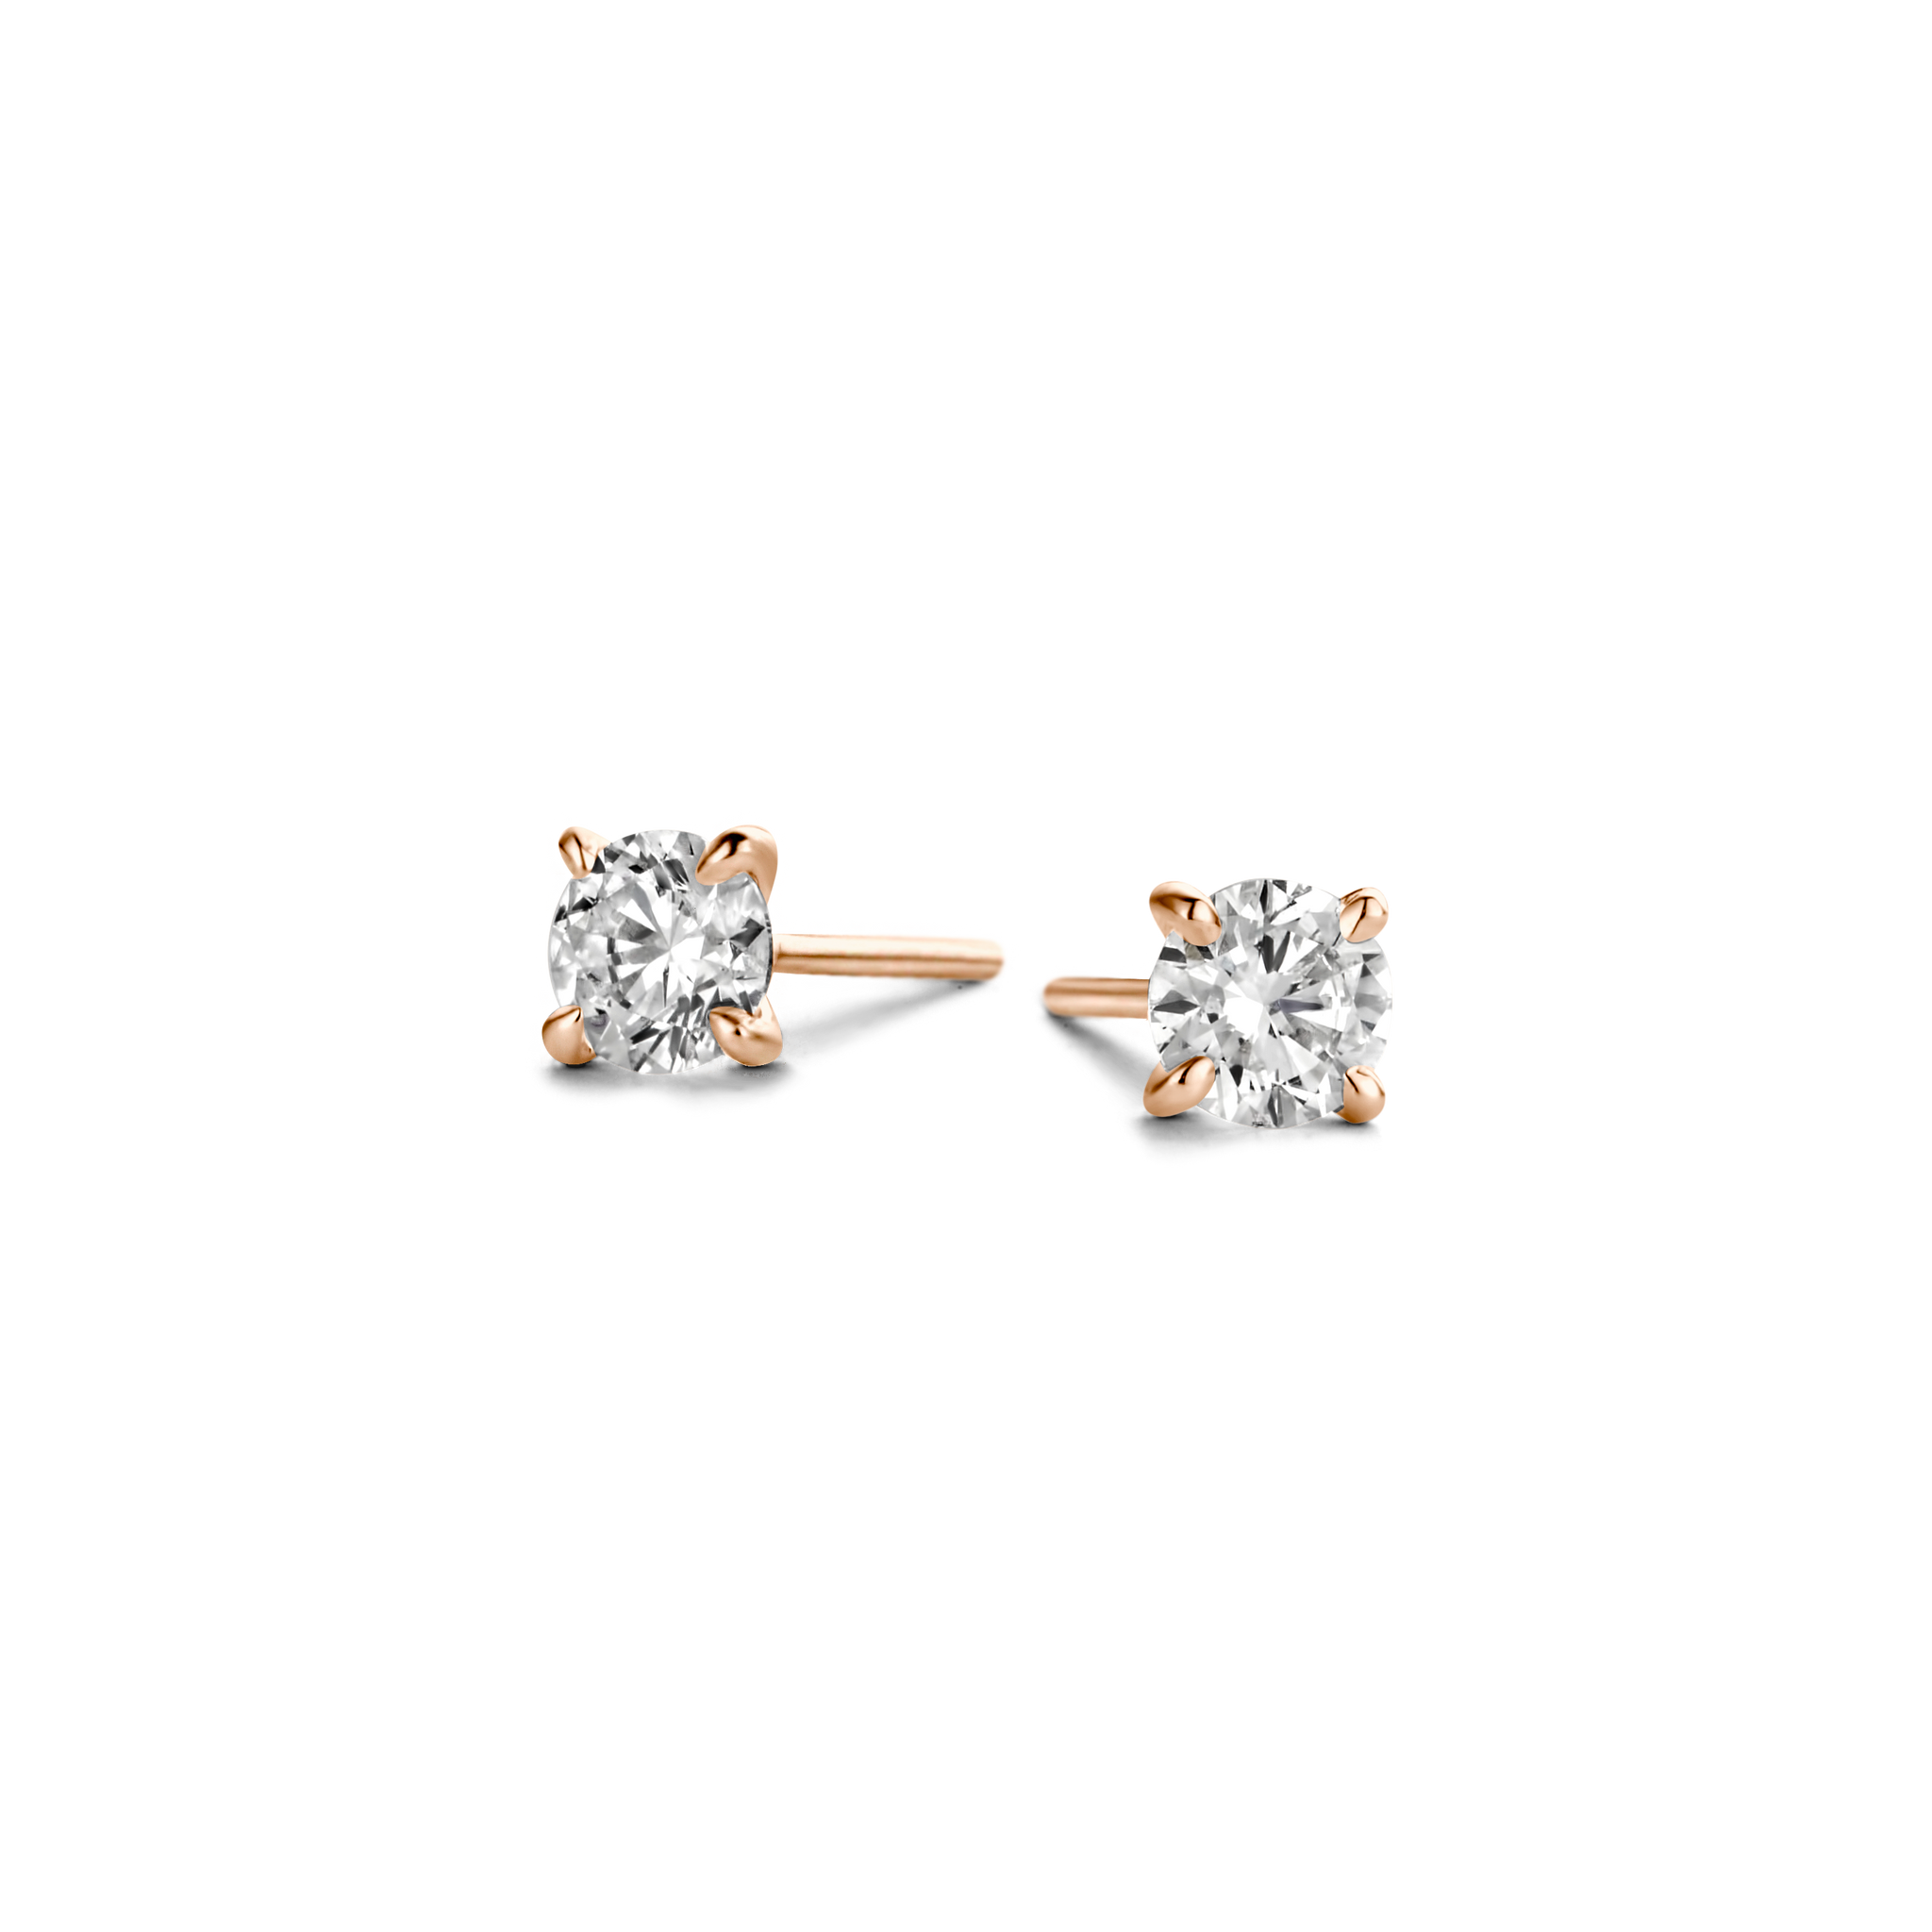 Polished 18k gold is illuminated by a solitaire D color, IF/VVS diamond, the unparalleled quality of which is on full display in a 4-prong setting. Sold as a pair; diamond carat weight refers to the total in the pair of studs. Rose Gold shown here.